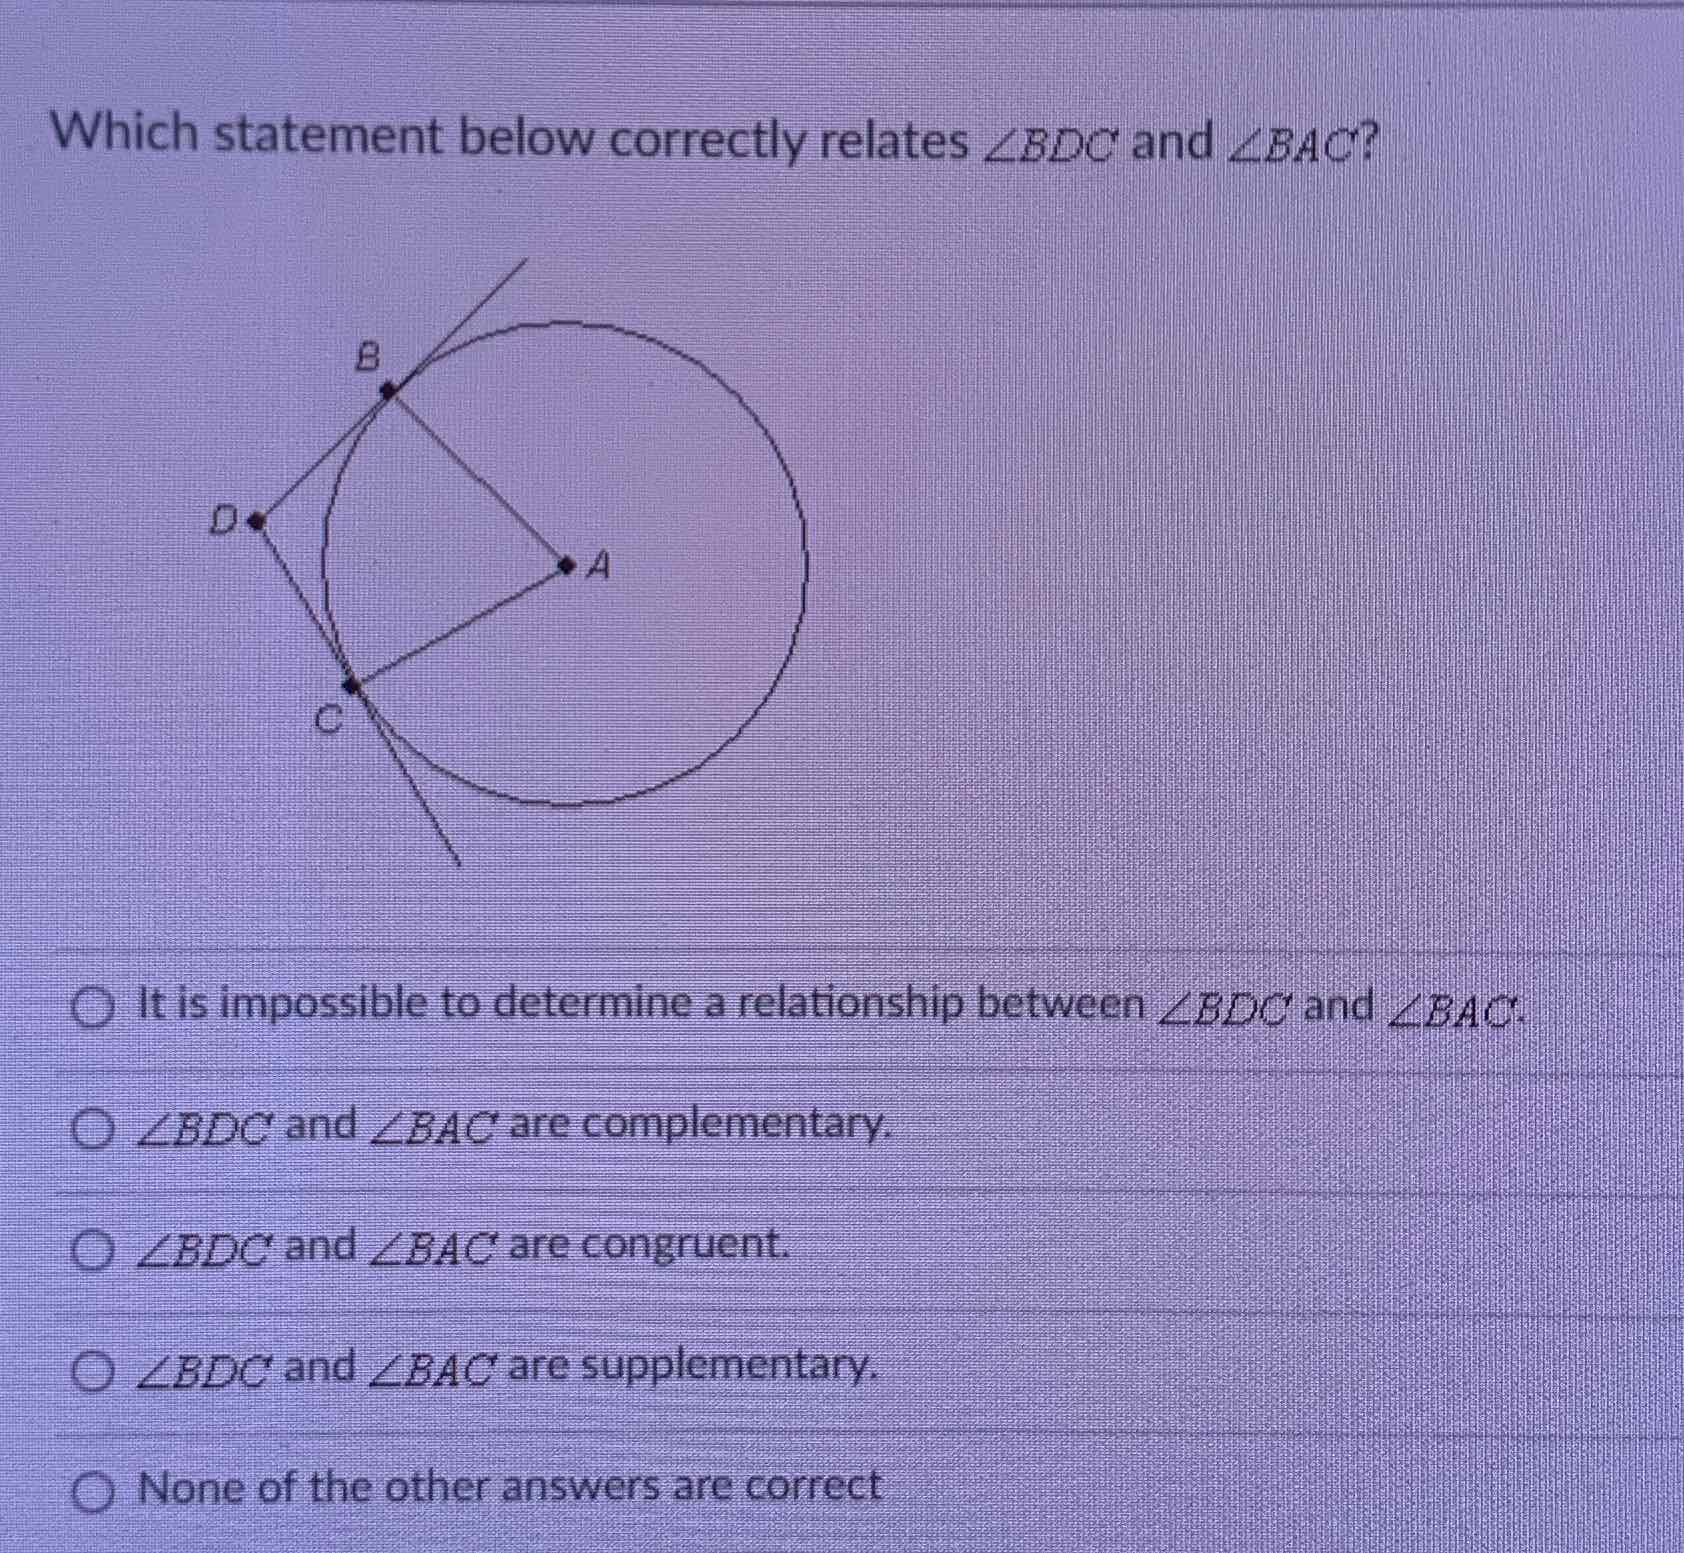 Which statement below correctly relates \( \angle B D C \) and \( \angle B A C \) ?
It is impossible to determine a relationship between \( \angle B D C \) and \( \angle B A C \).
\( \angle B D C \) and \( \angle B A C \) are complementary.
\( \angle B D C \) and \( \angle B A C \) are congruent.
\( \angle B D C \) and \( \angle B A C \) are supplementary.
None of the other answers are correct